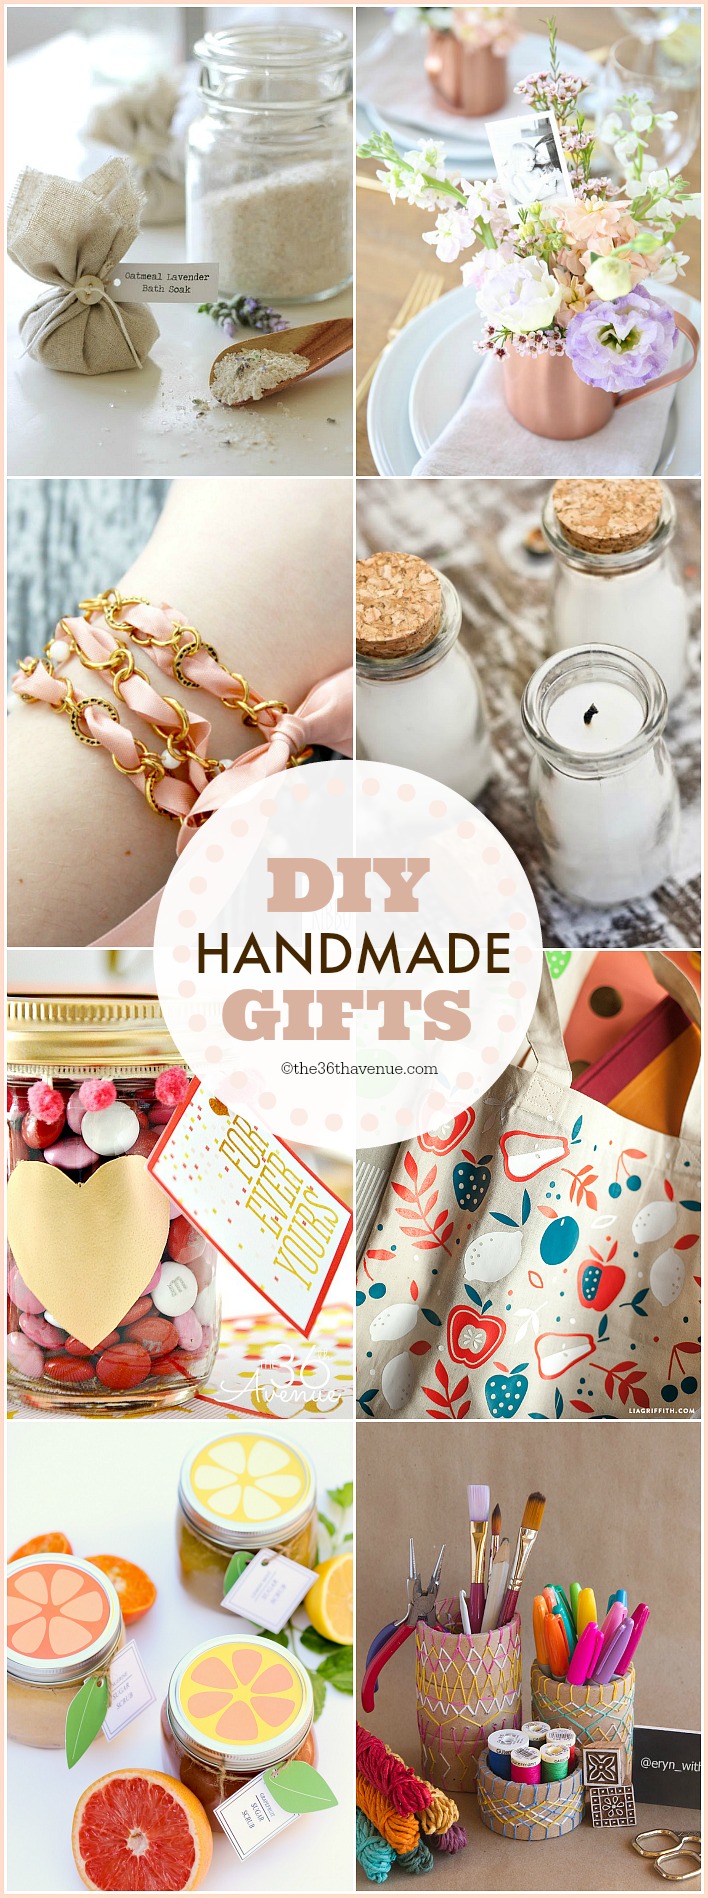 100 Handmade  Gifts  Under Five Dollars The 36th AVENUE